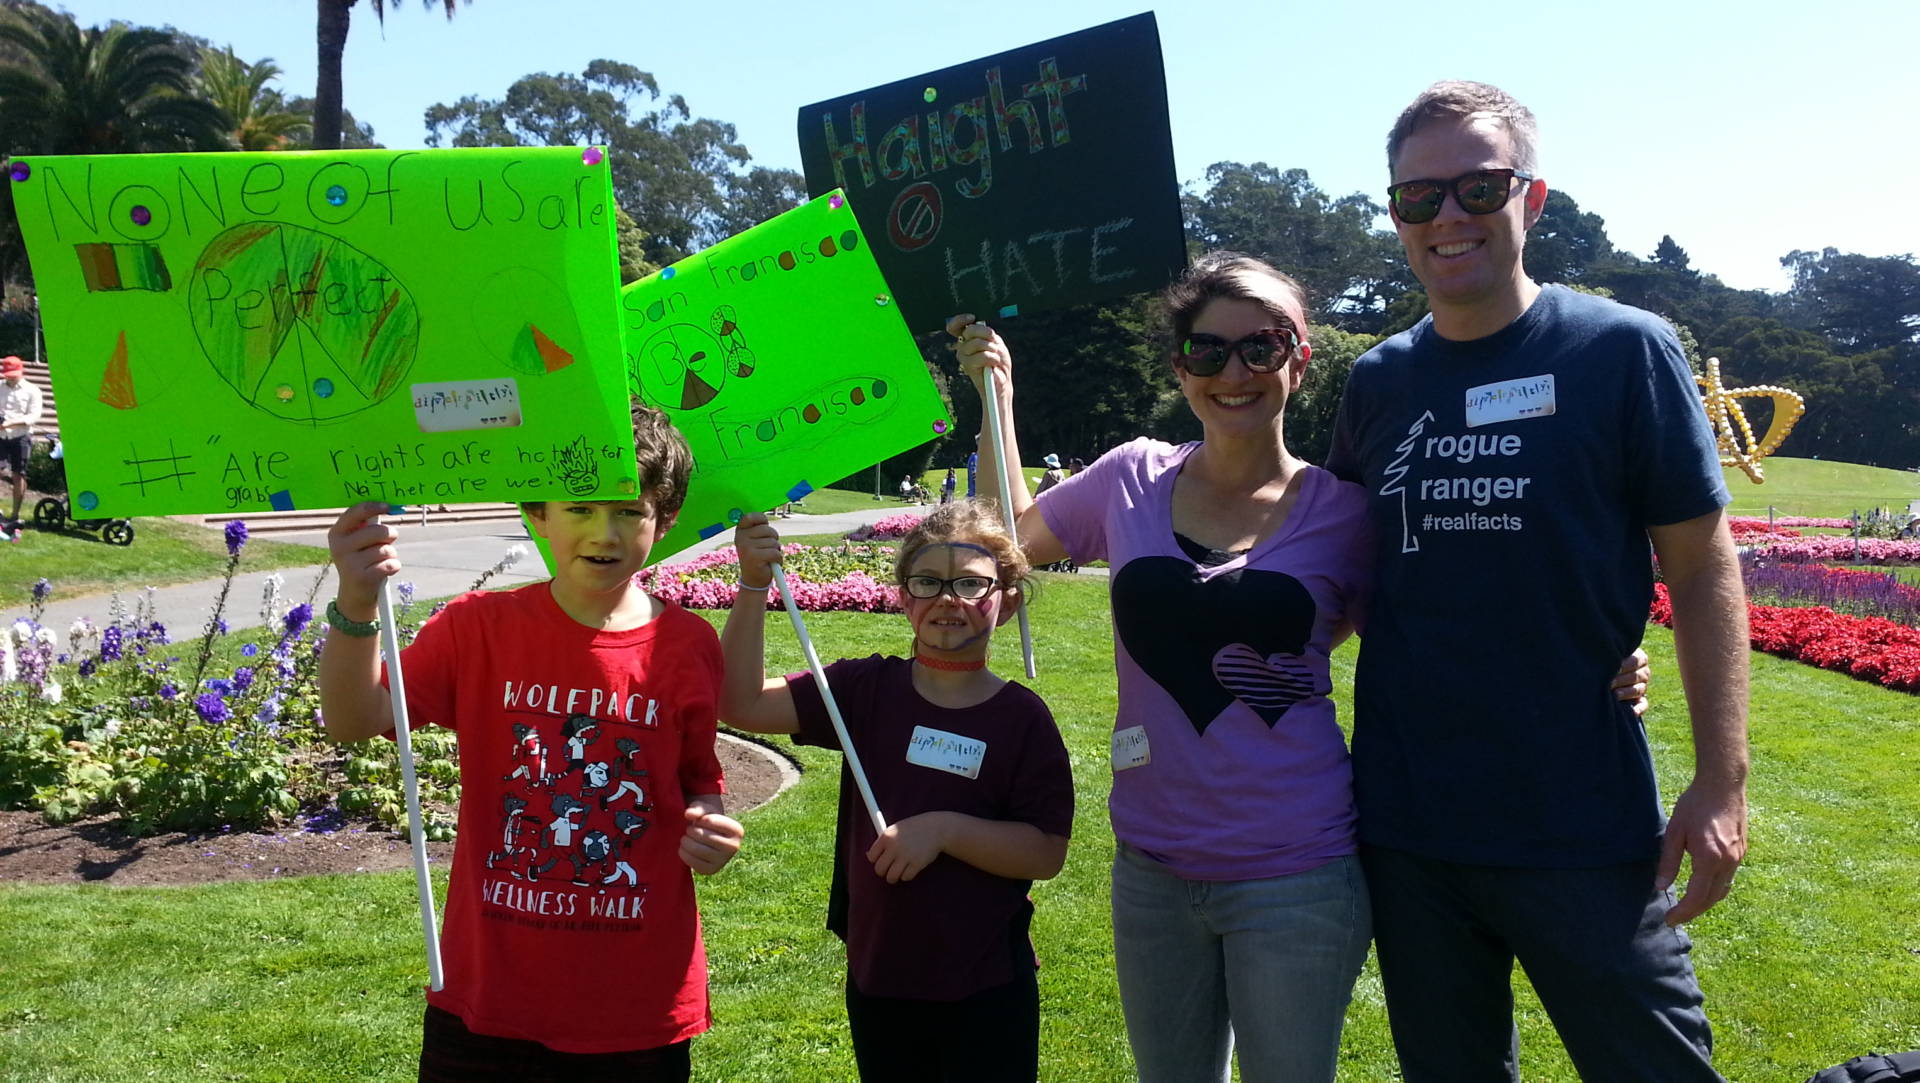 The Toberner family waves their banners at The Cutest Lil Counter Protest in Golden Gate Park. Photo: Creo Noveno/KQED